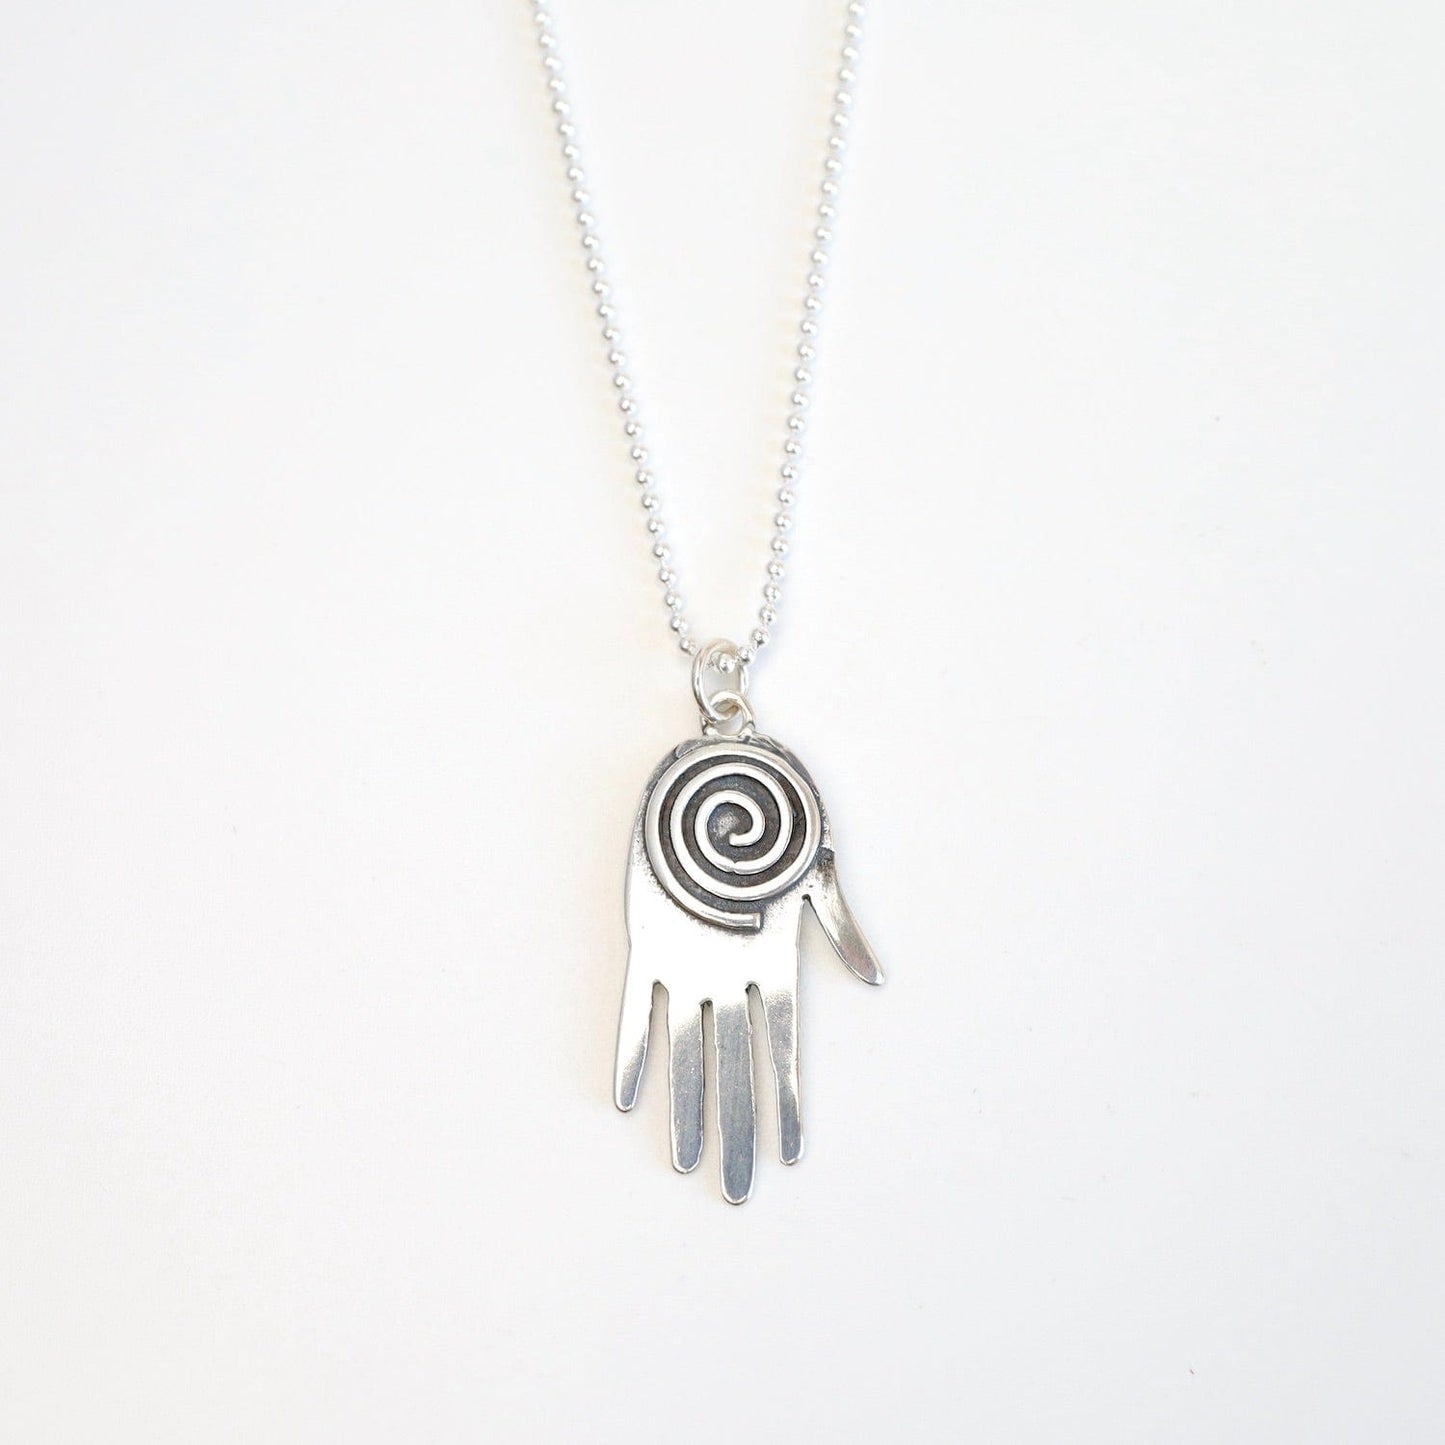 NKL Hand of Fatima Necklace